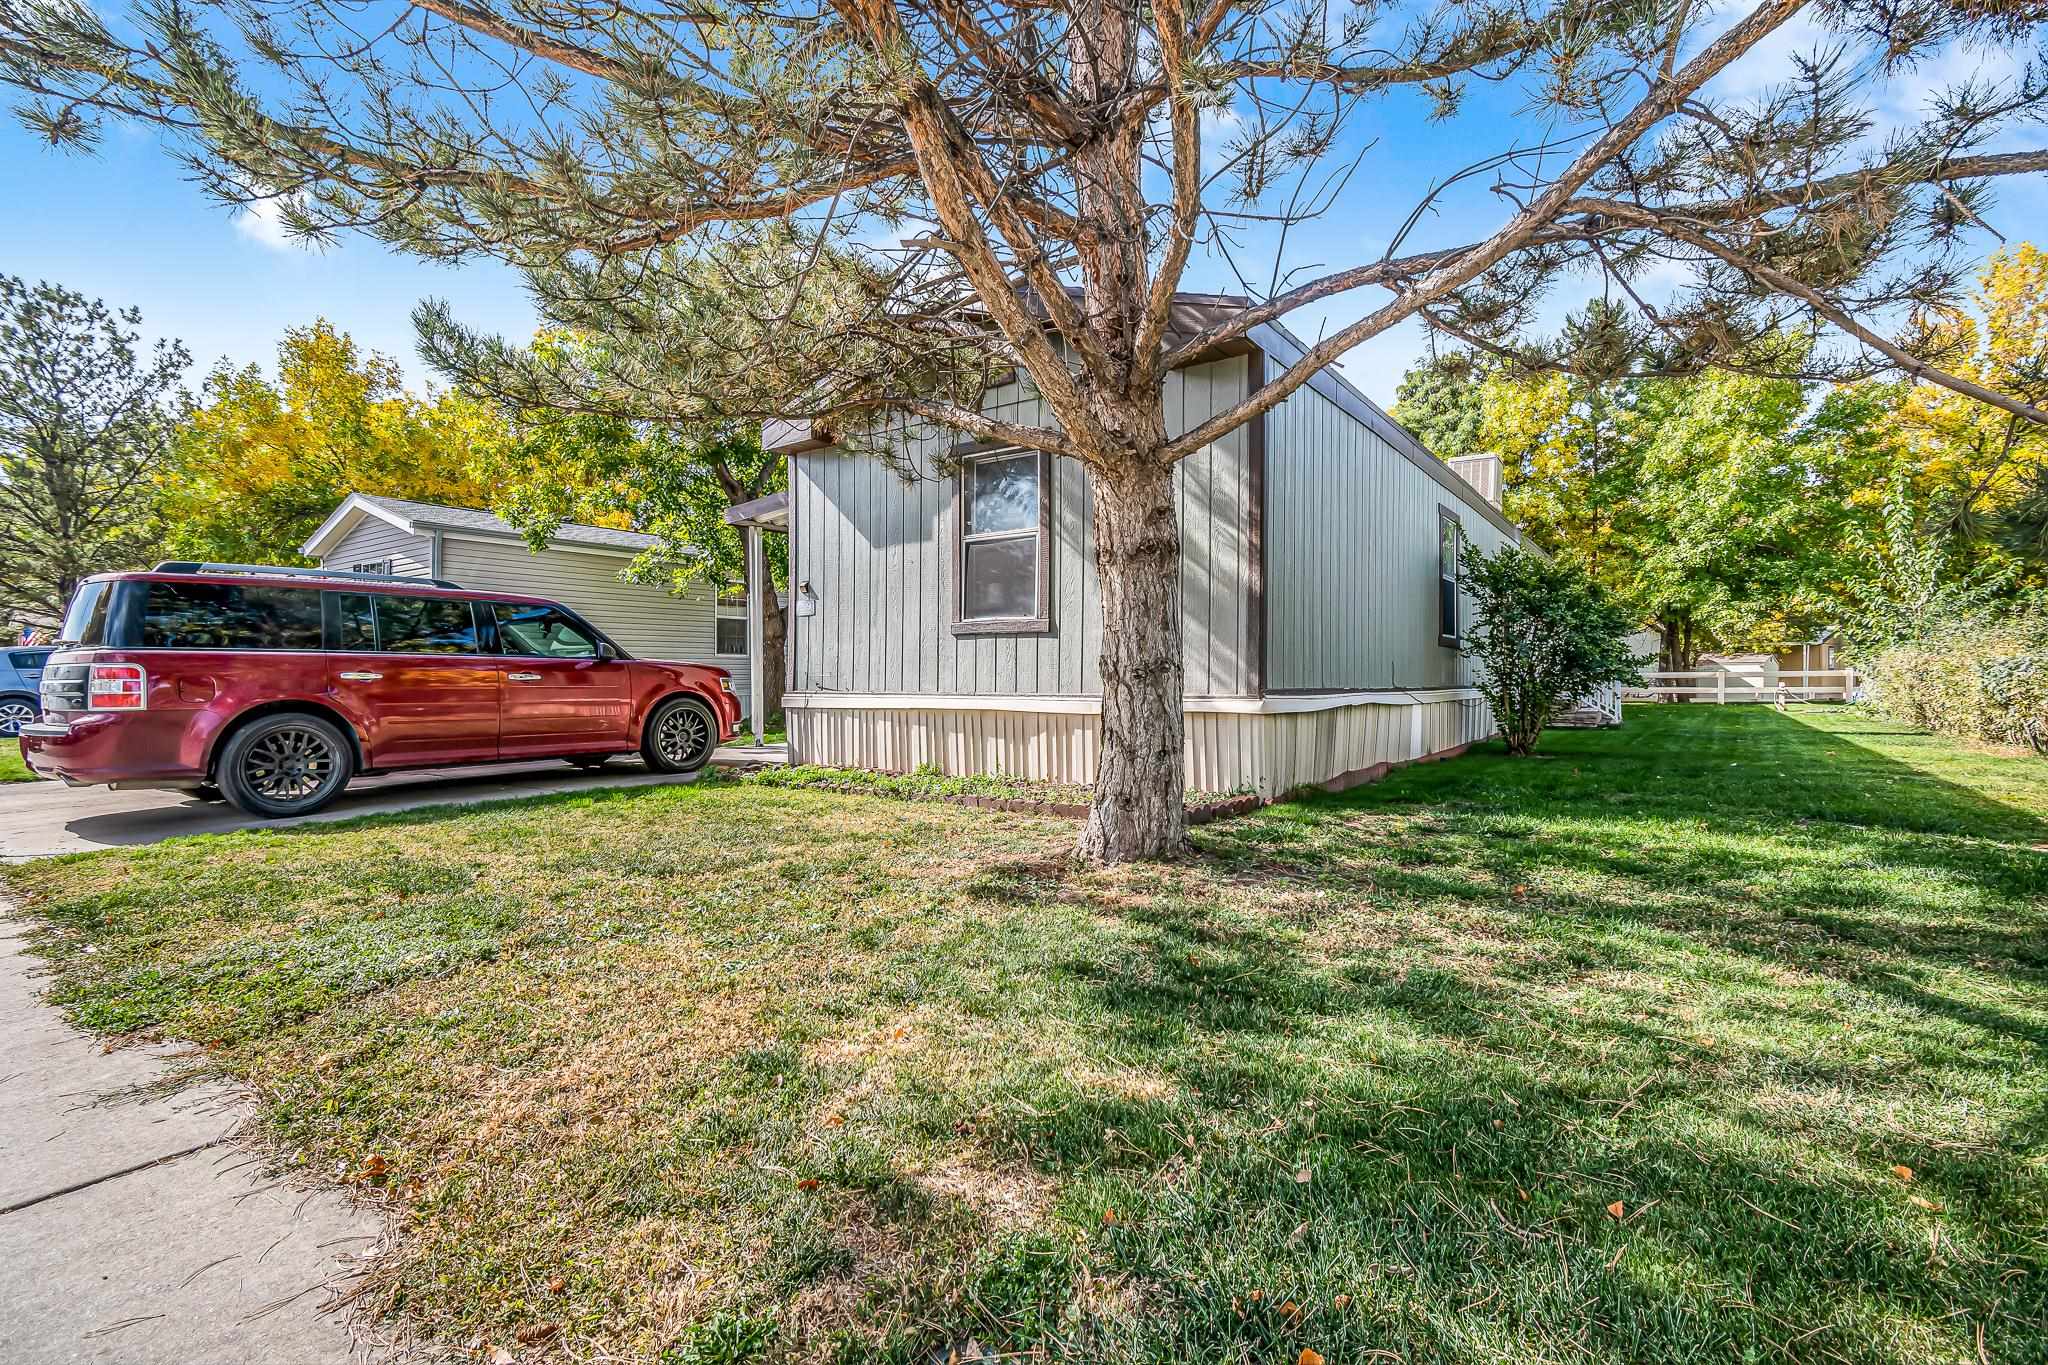 435 32 Road 209, Clifton, CO 81520